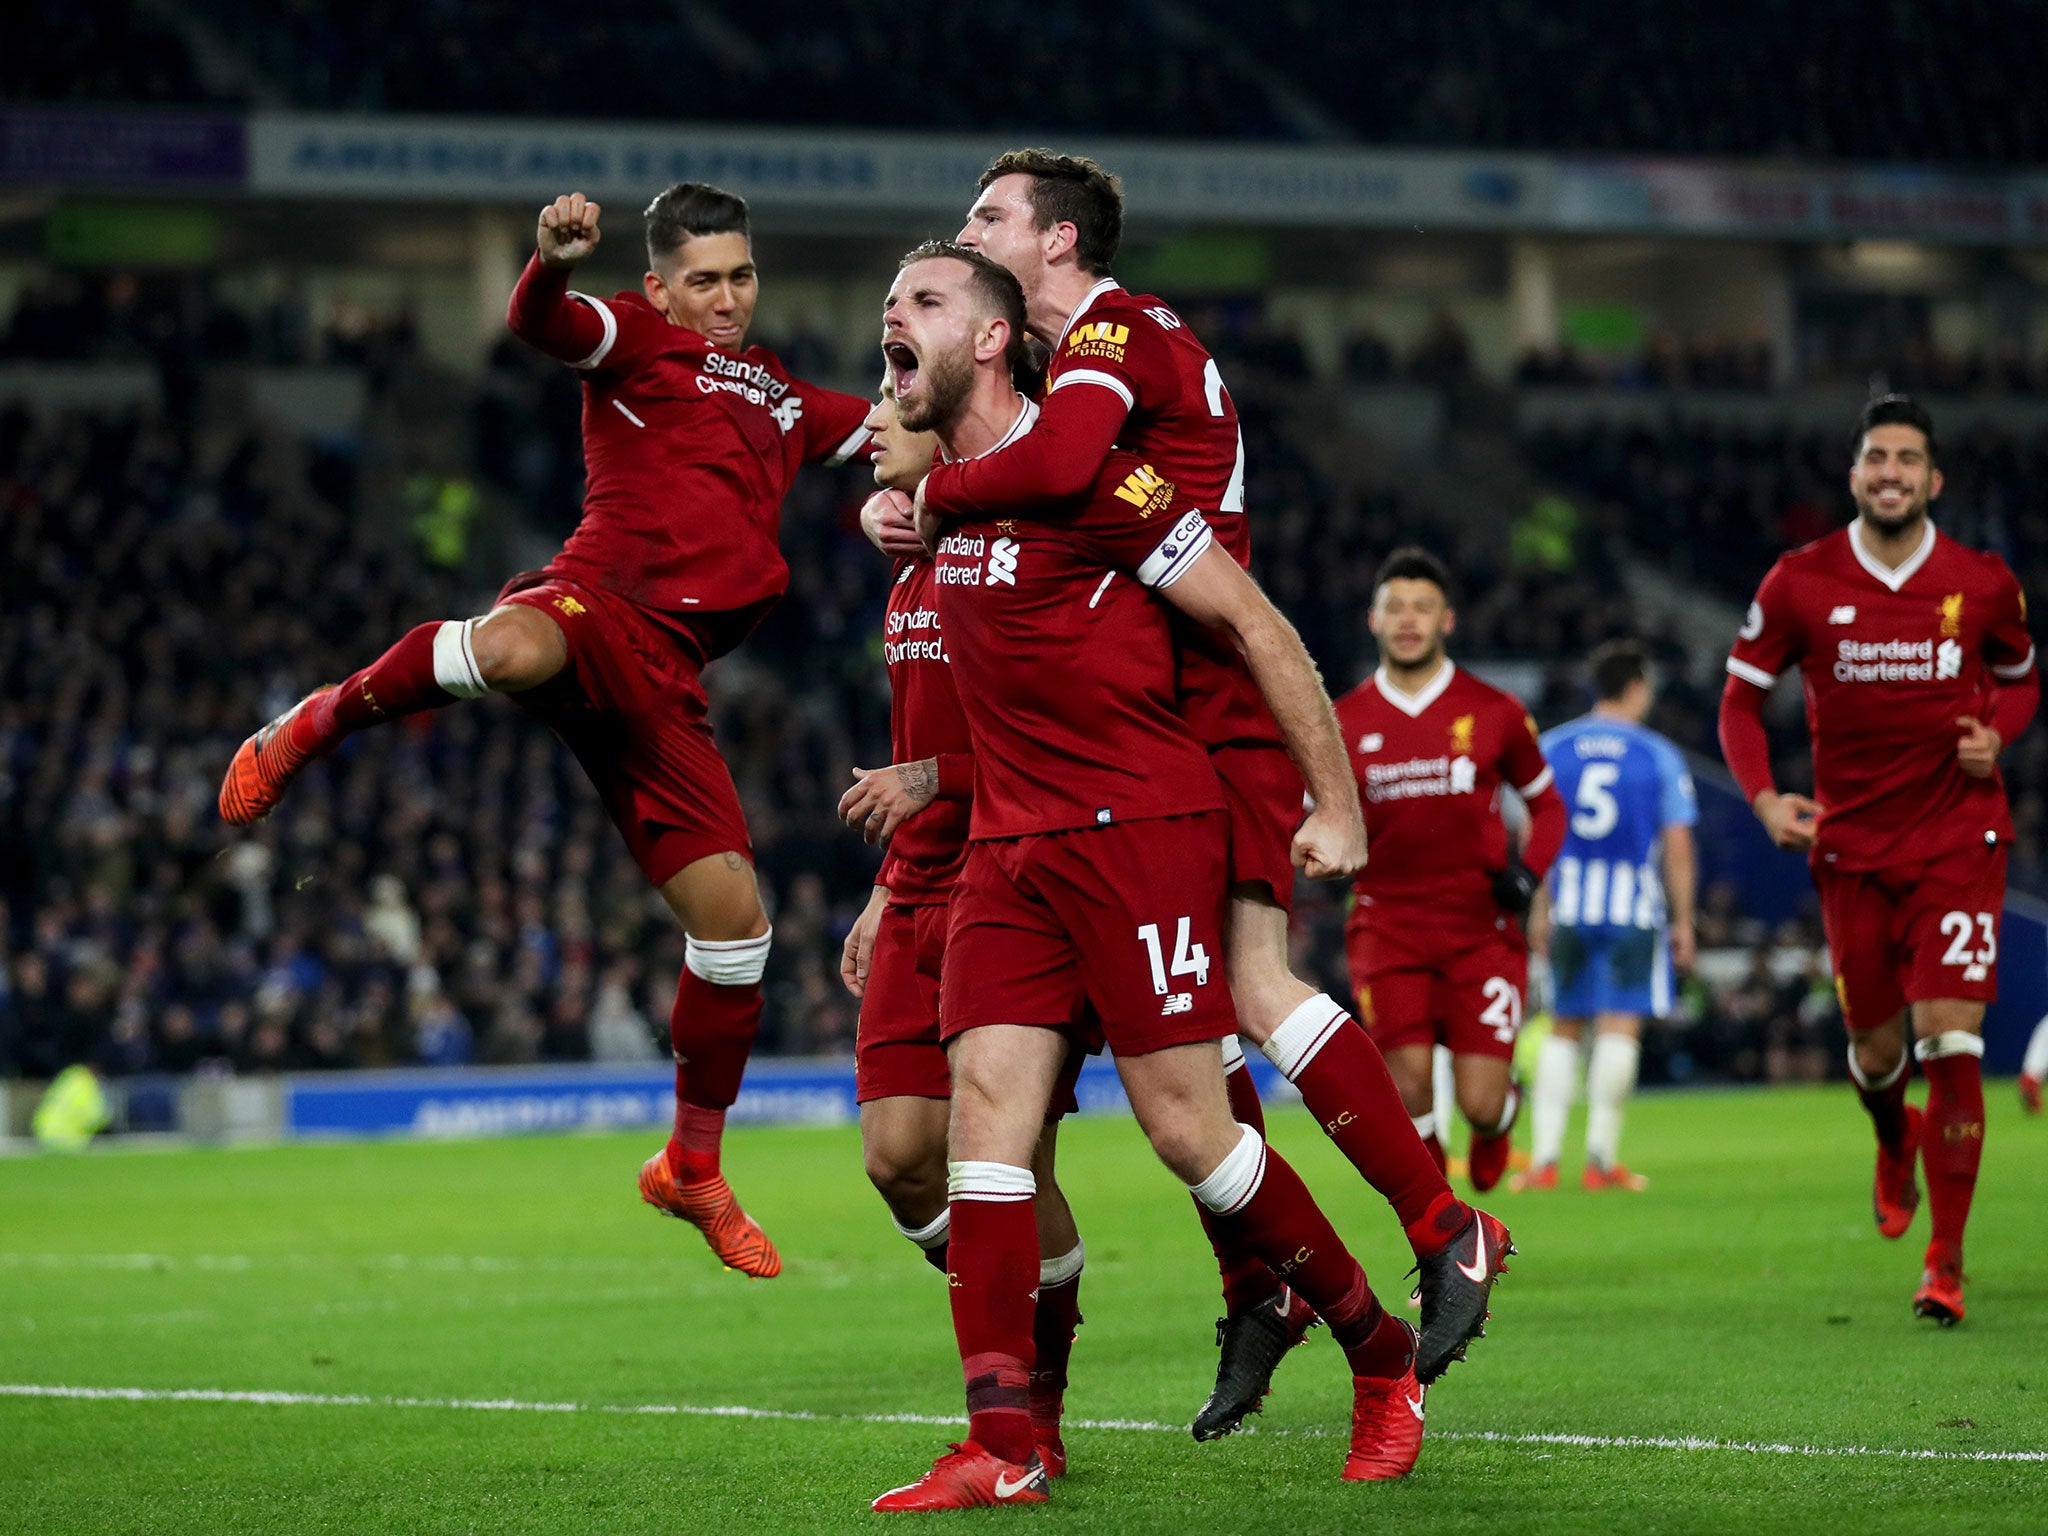 Liverpool romped past Brighton on Saturday in a 5-1 victory